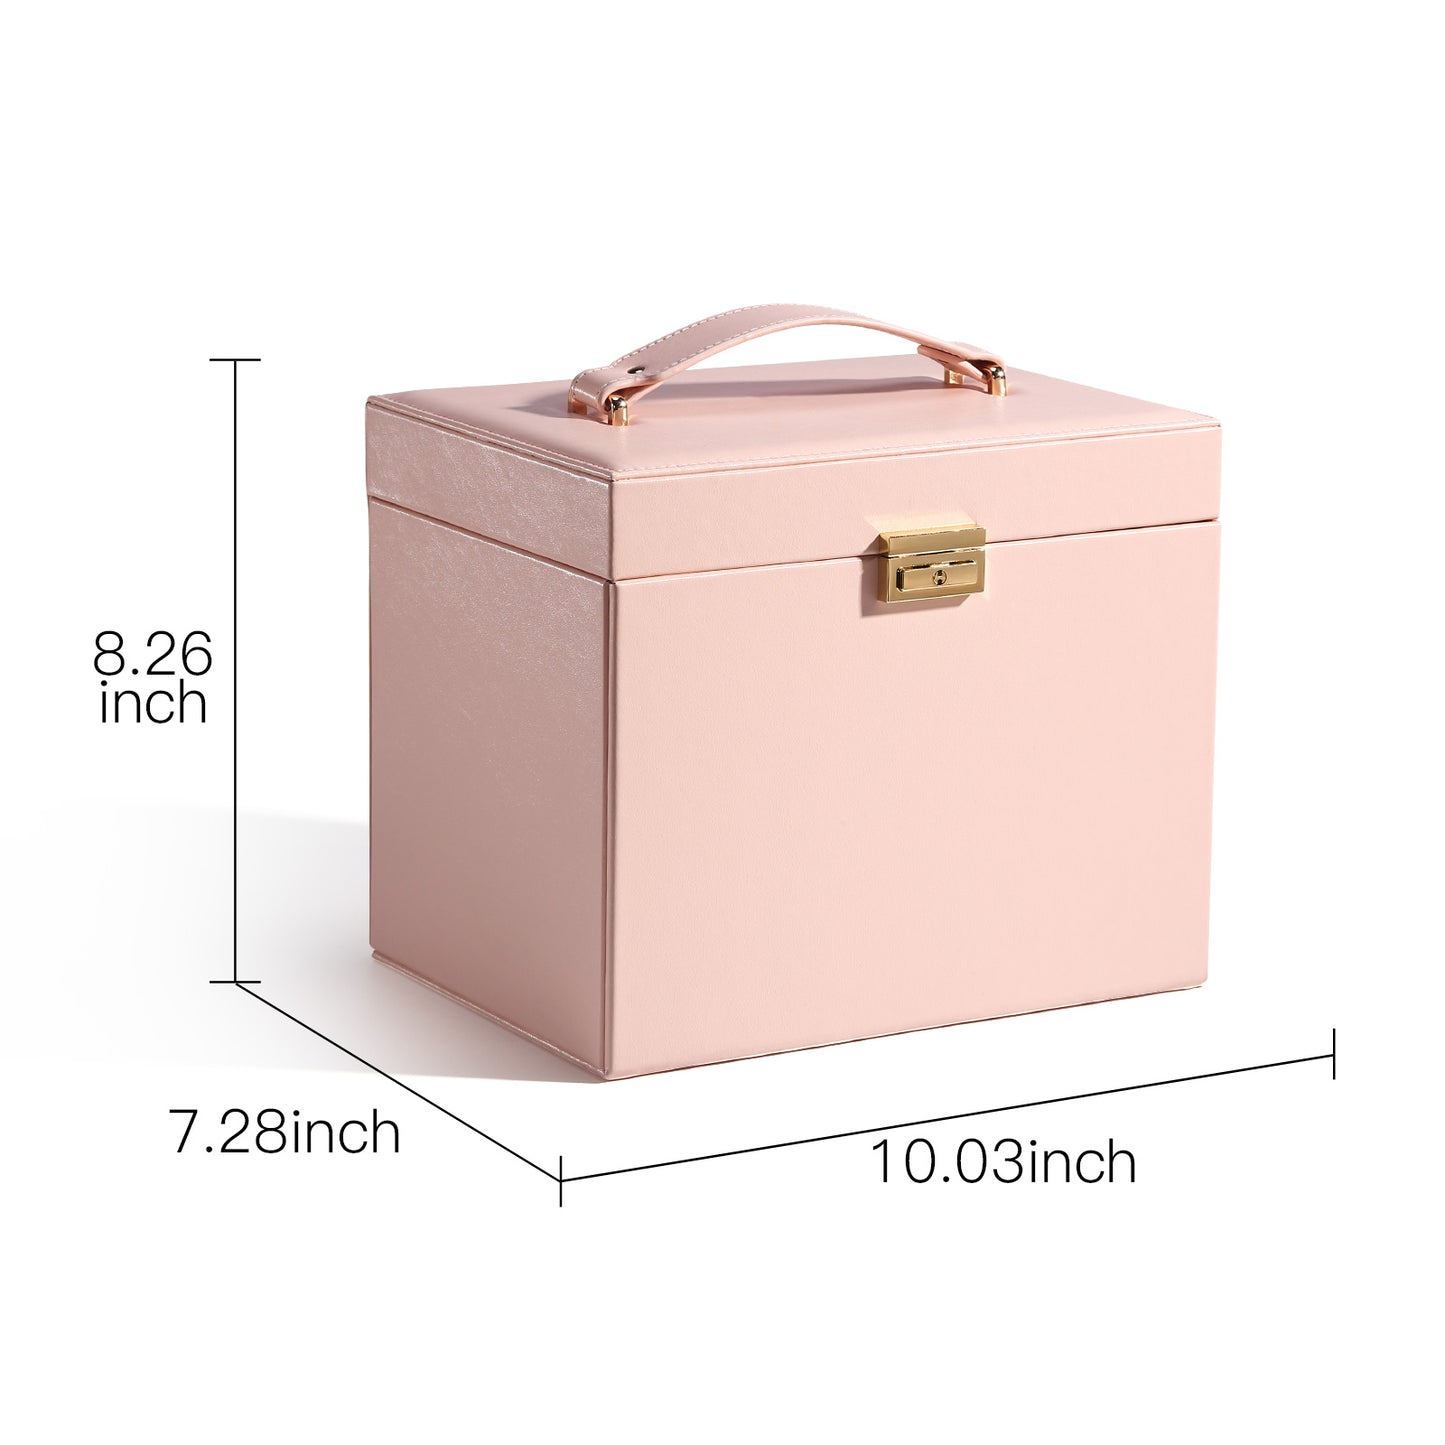 Supersize Jewelry Box with Lock and Mirror, Christmas Gift for Women Lady Girls